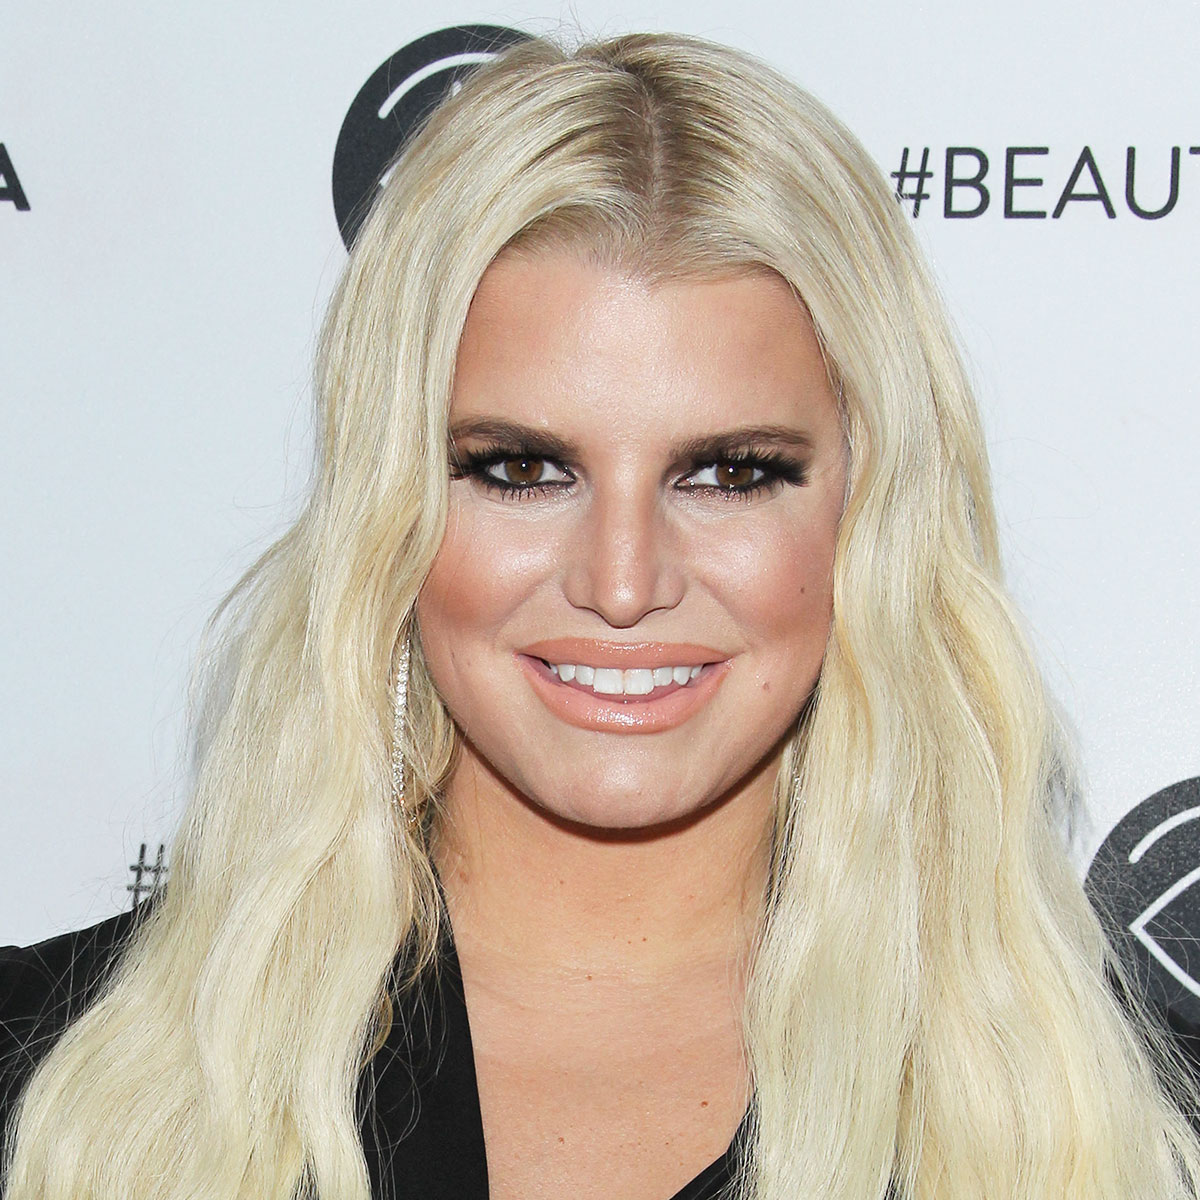 Jessica Simpson used home as collateral to buy her namesake